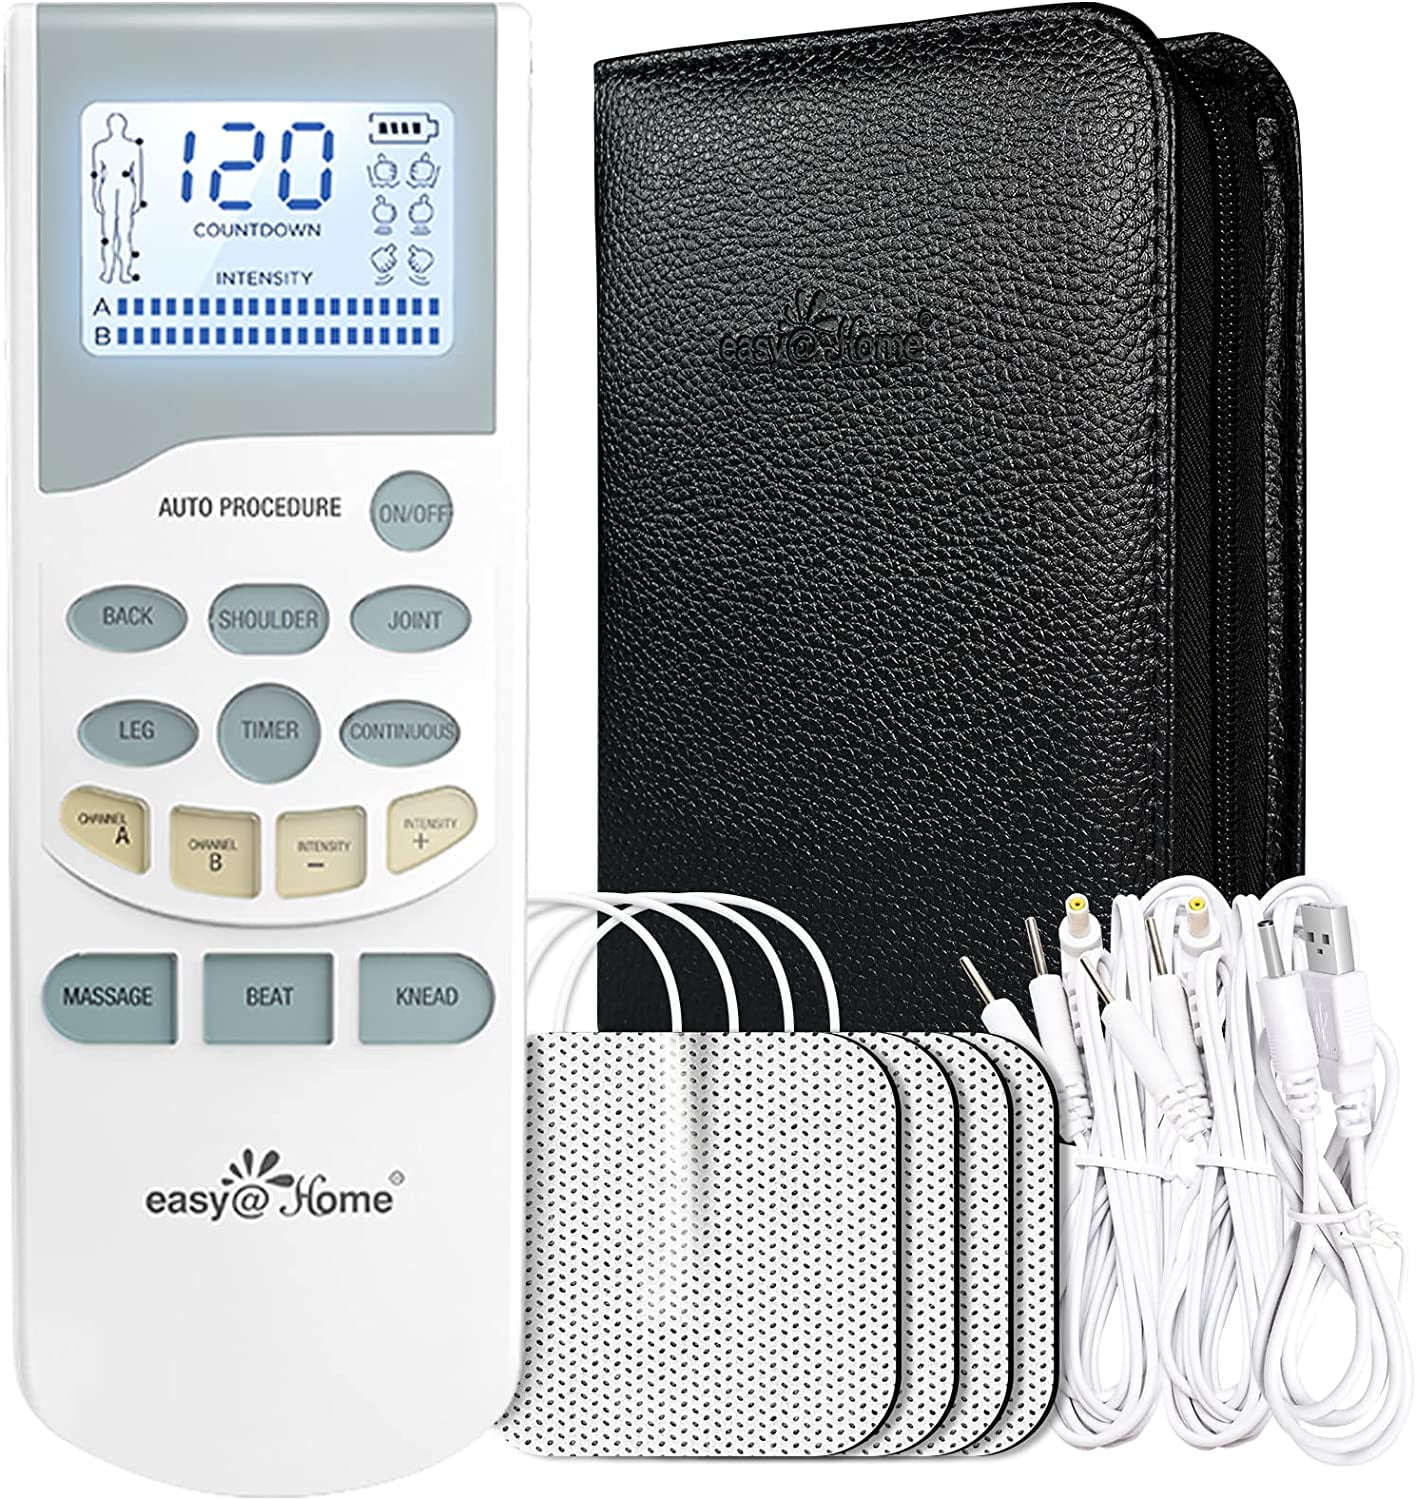 Easy@Home Professional TENS Unit Muscle Stimulator Tens Machine Massager, Powerful 2-Output EHE012PRO